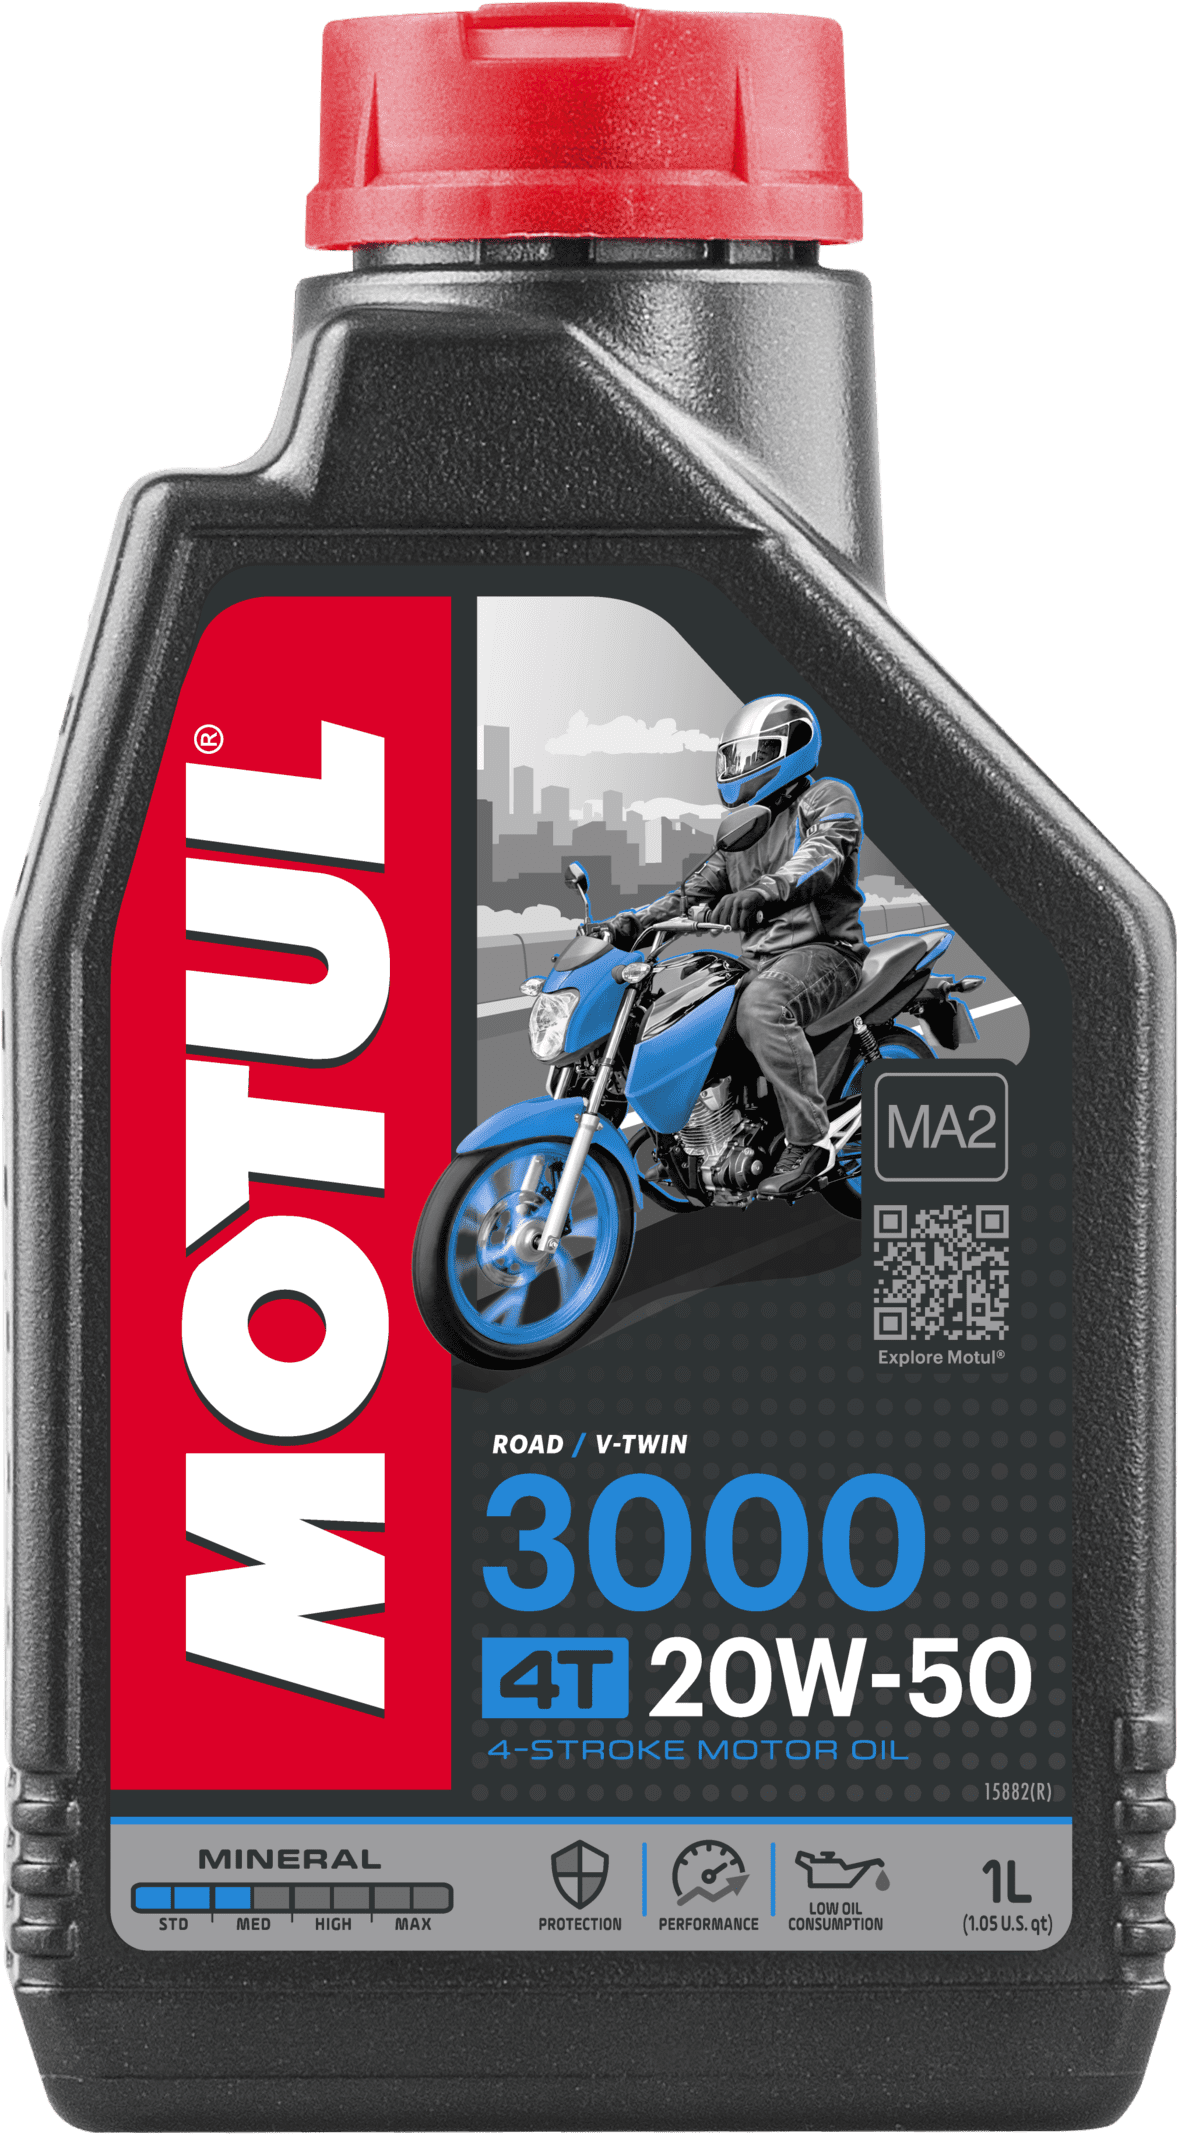 107318-1 Mineral engine lubricant. This product is specially designed for street & road bikes, trails, off-road bikes among others fitted with 4 Stroke engines with integrated gearbox or not and wet or dry clutch requiring API SL standards.